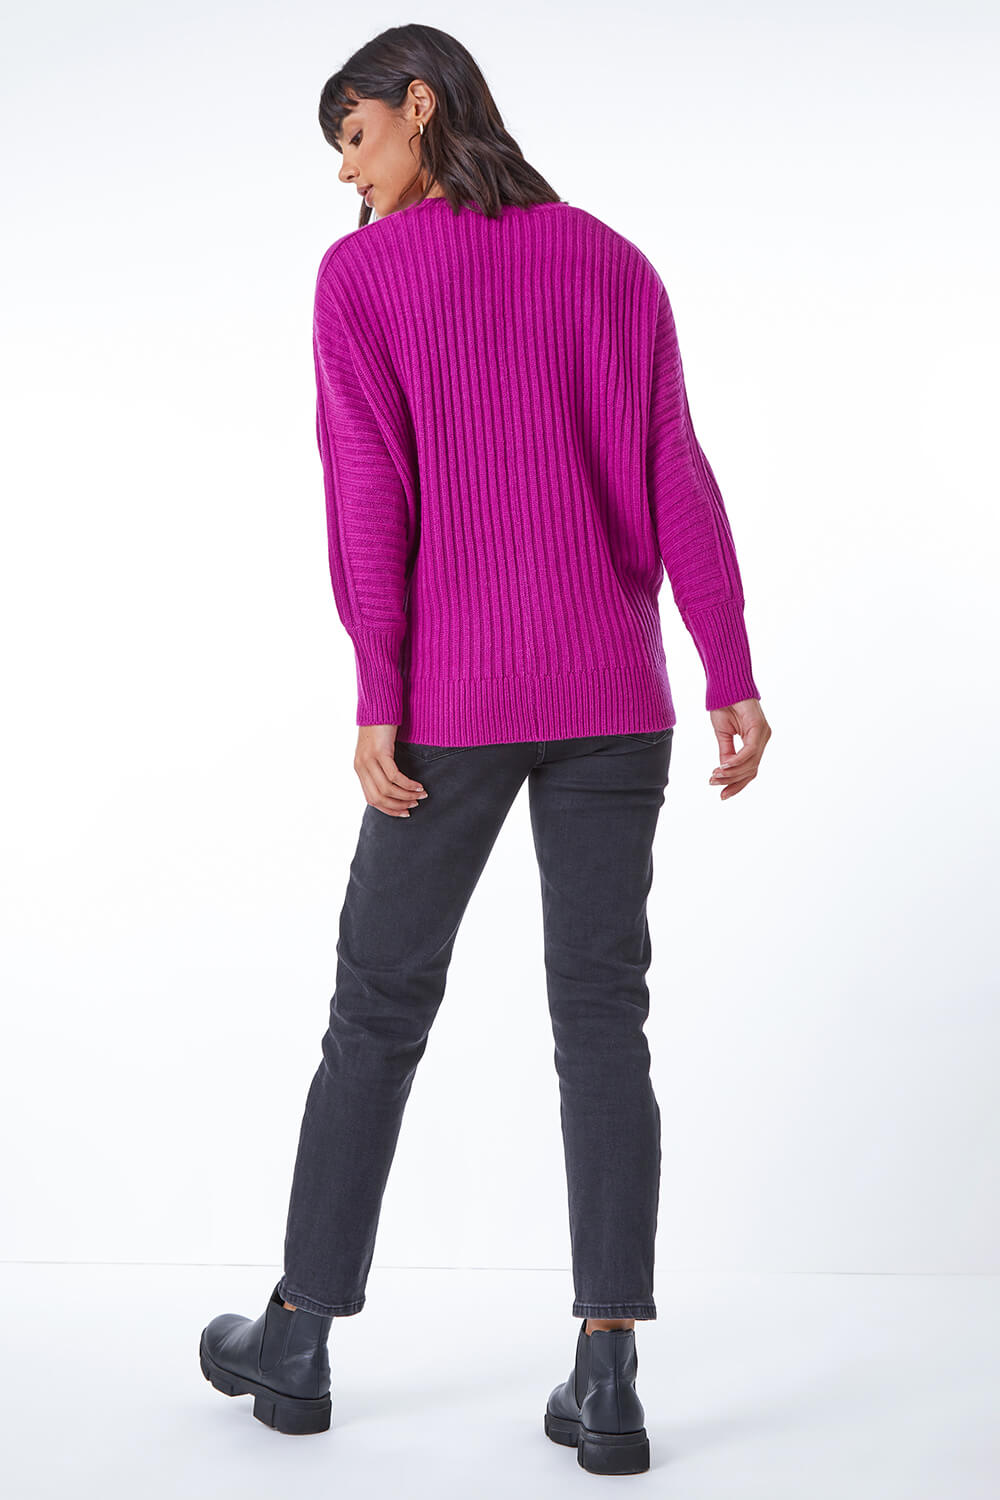 MAGENTA Ribbed Batwing Knitted Jumper , Image 3 of 5